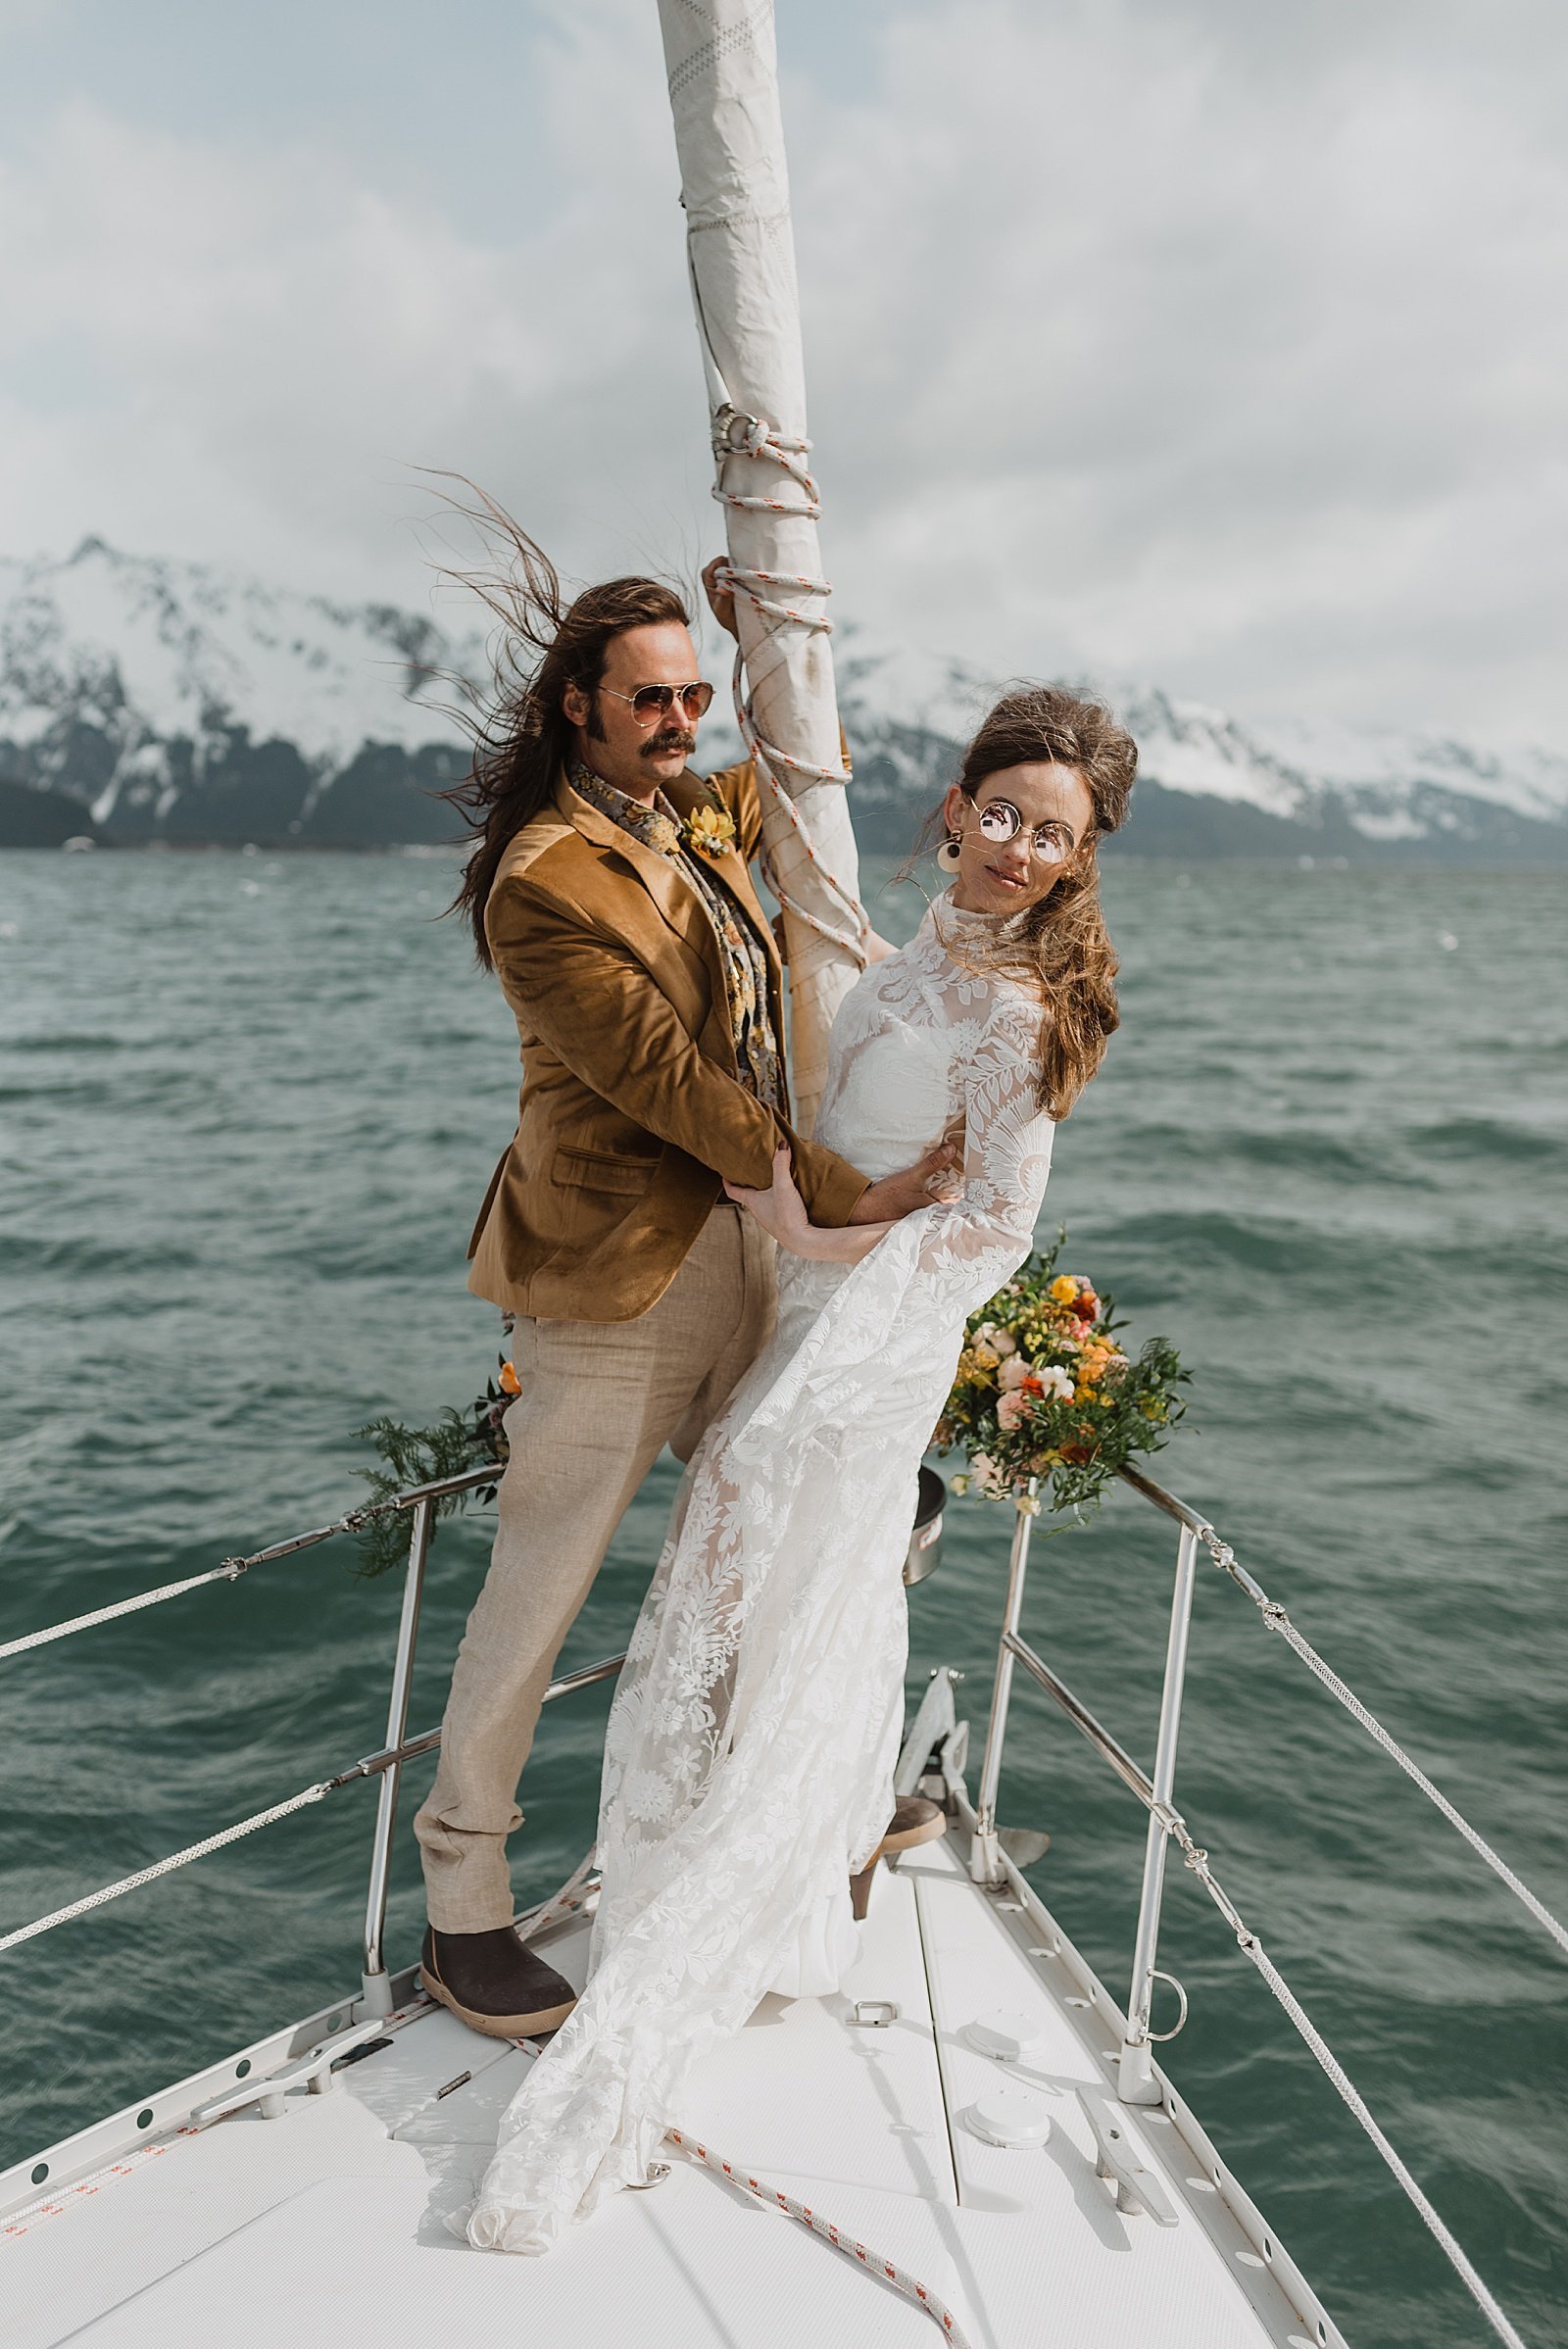  Bride and groom in 70s attire on a boat in Seward 